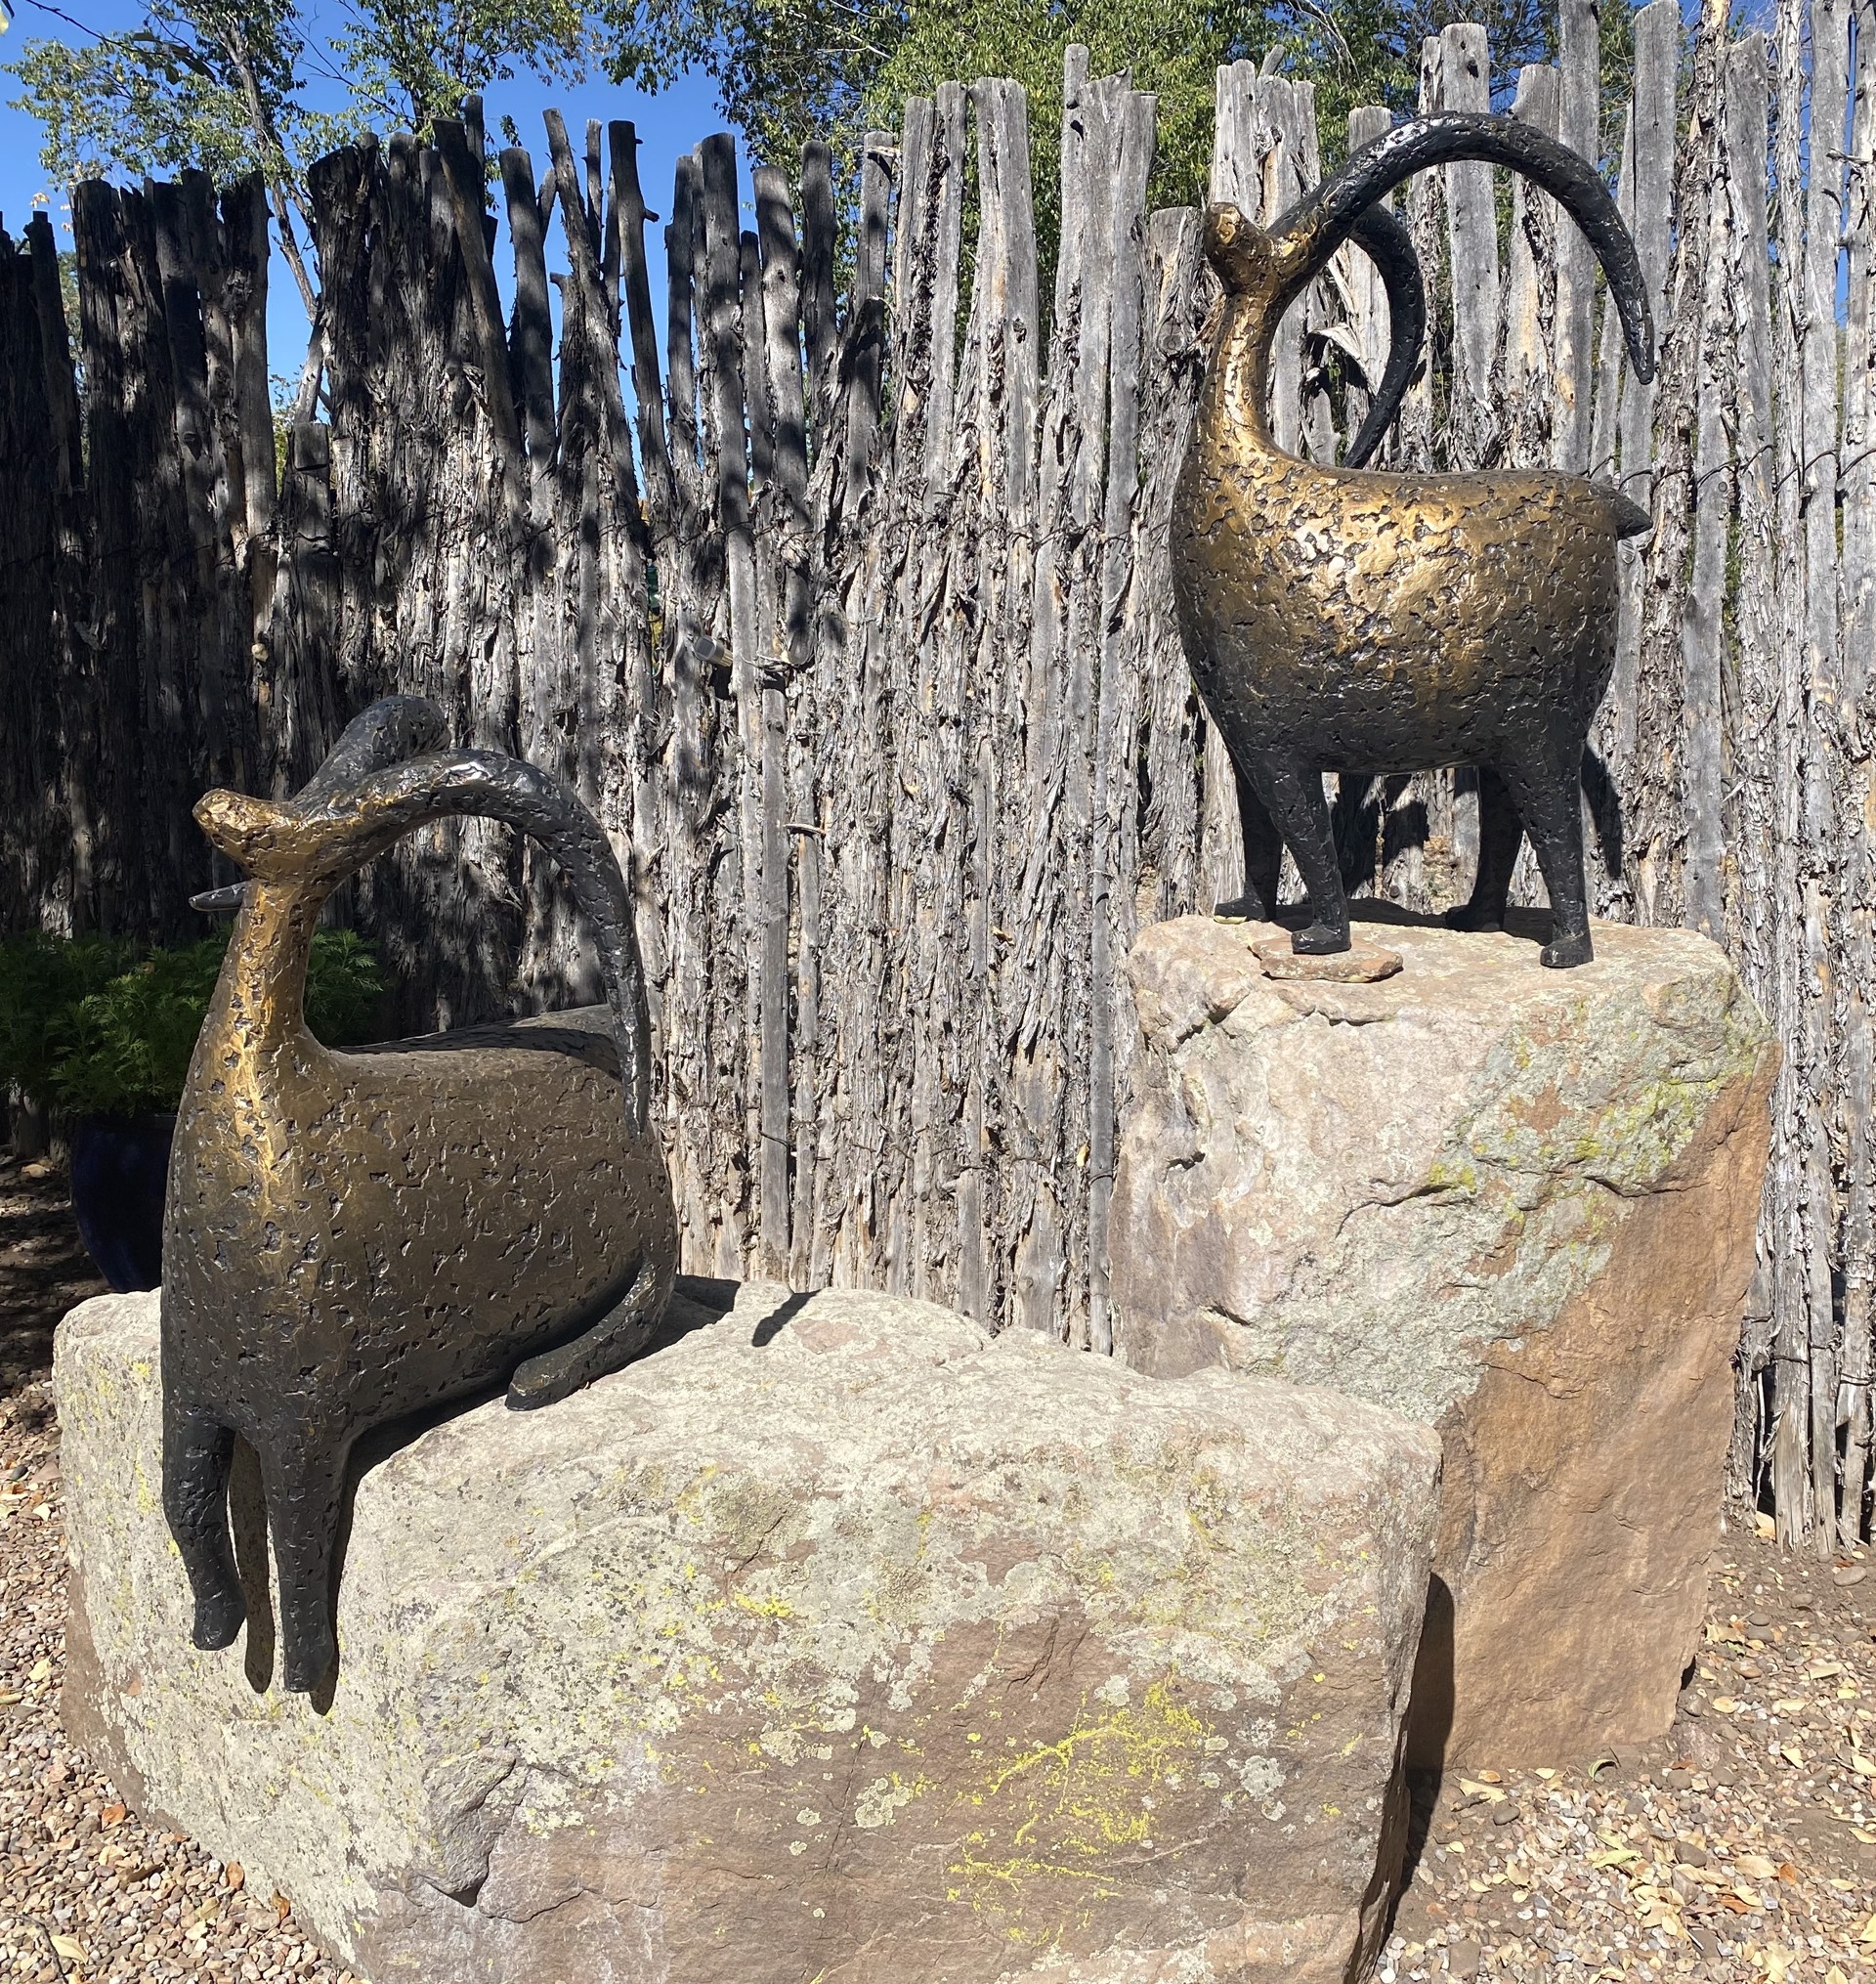 XL Standing and Seated Stargazers on Rock Pedestals - Standing 38"x19"x22" Bronze, $13,000...Seated 24"x24"x20" Bronze, $12,000...Rock Pedestals sold separately by Jill Shwaiko